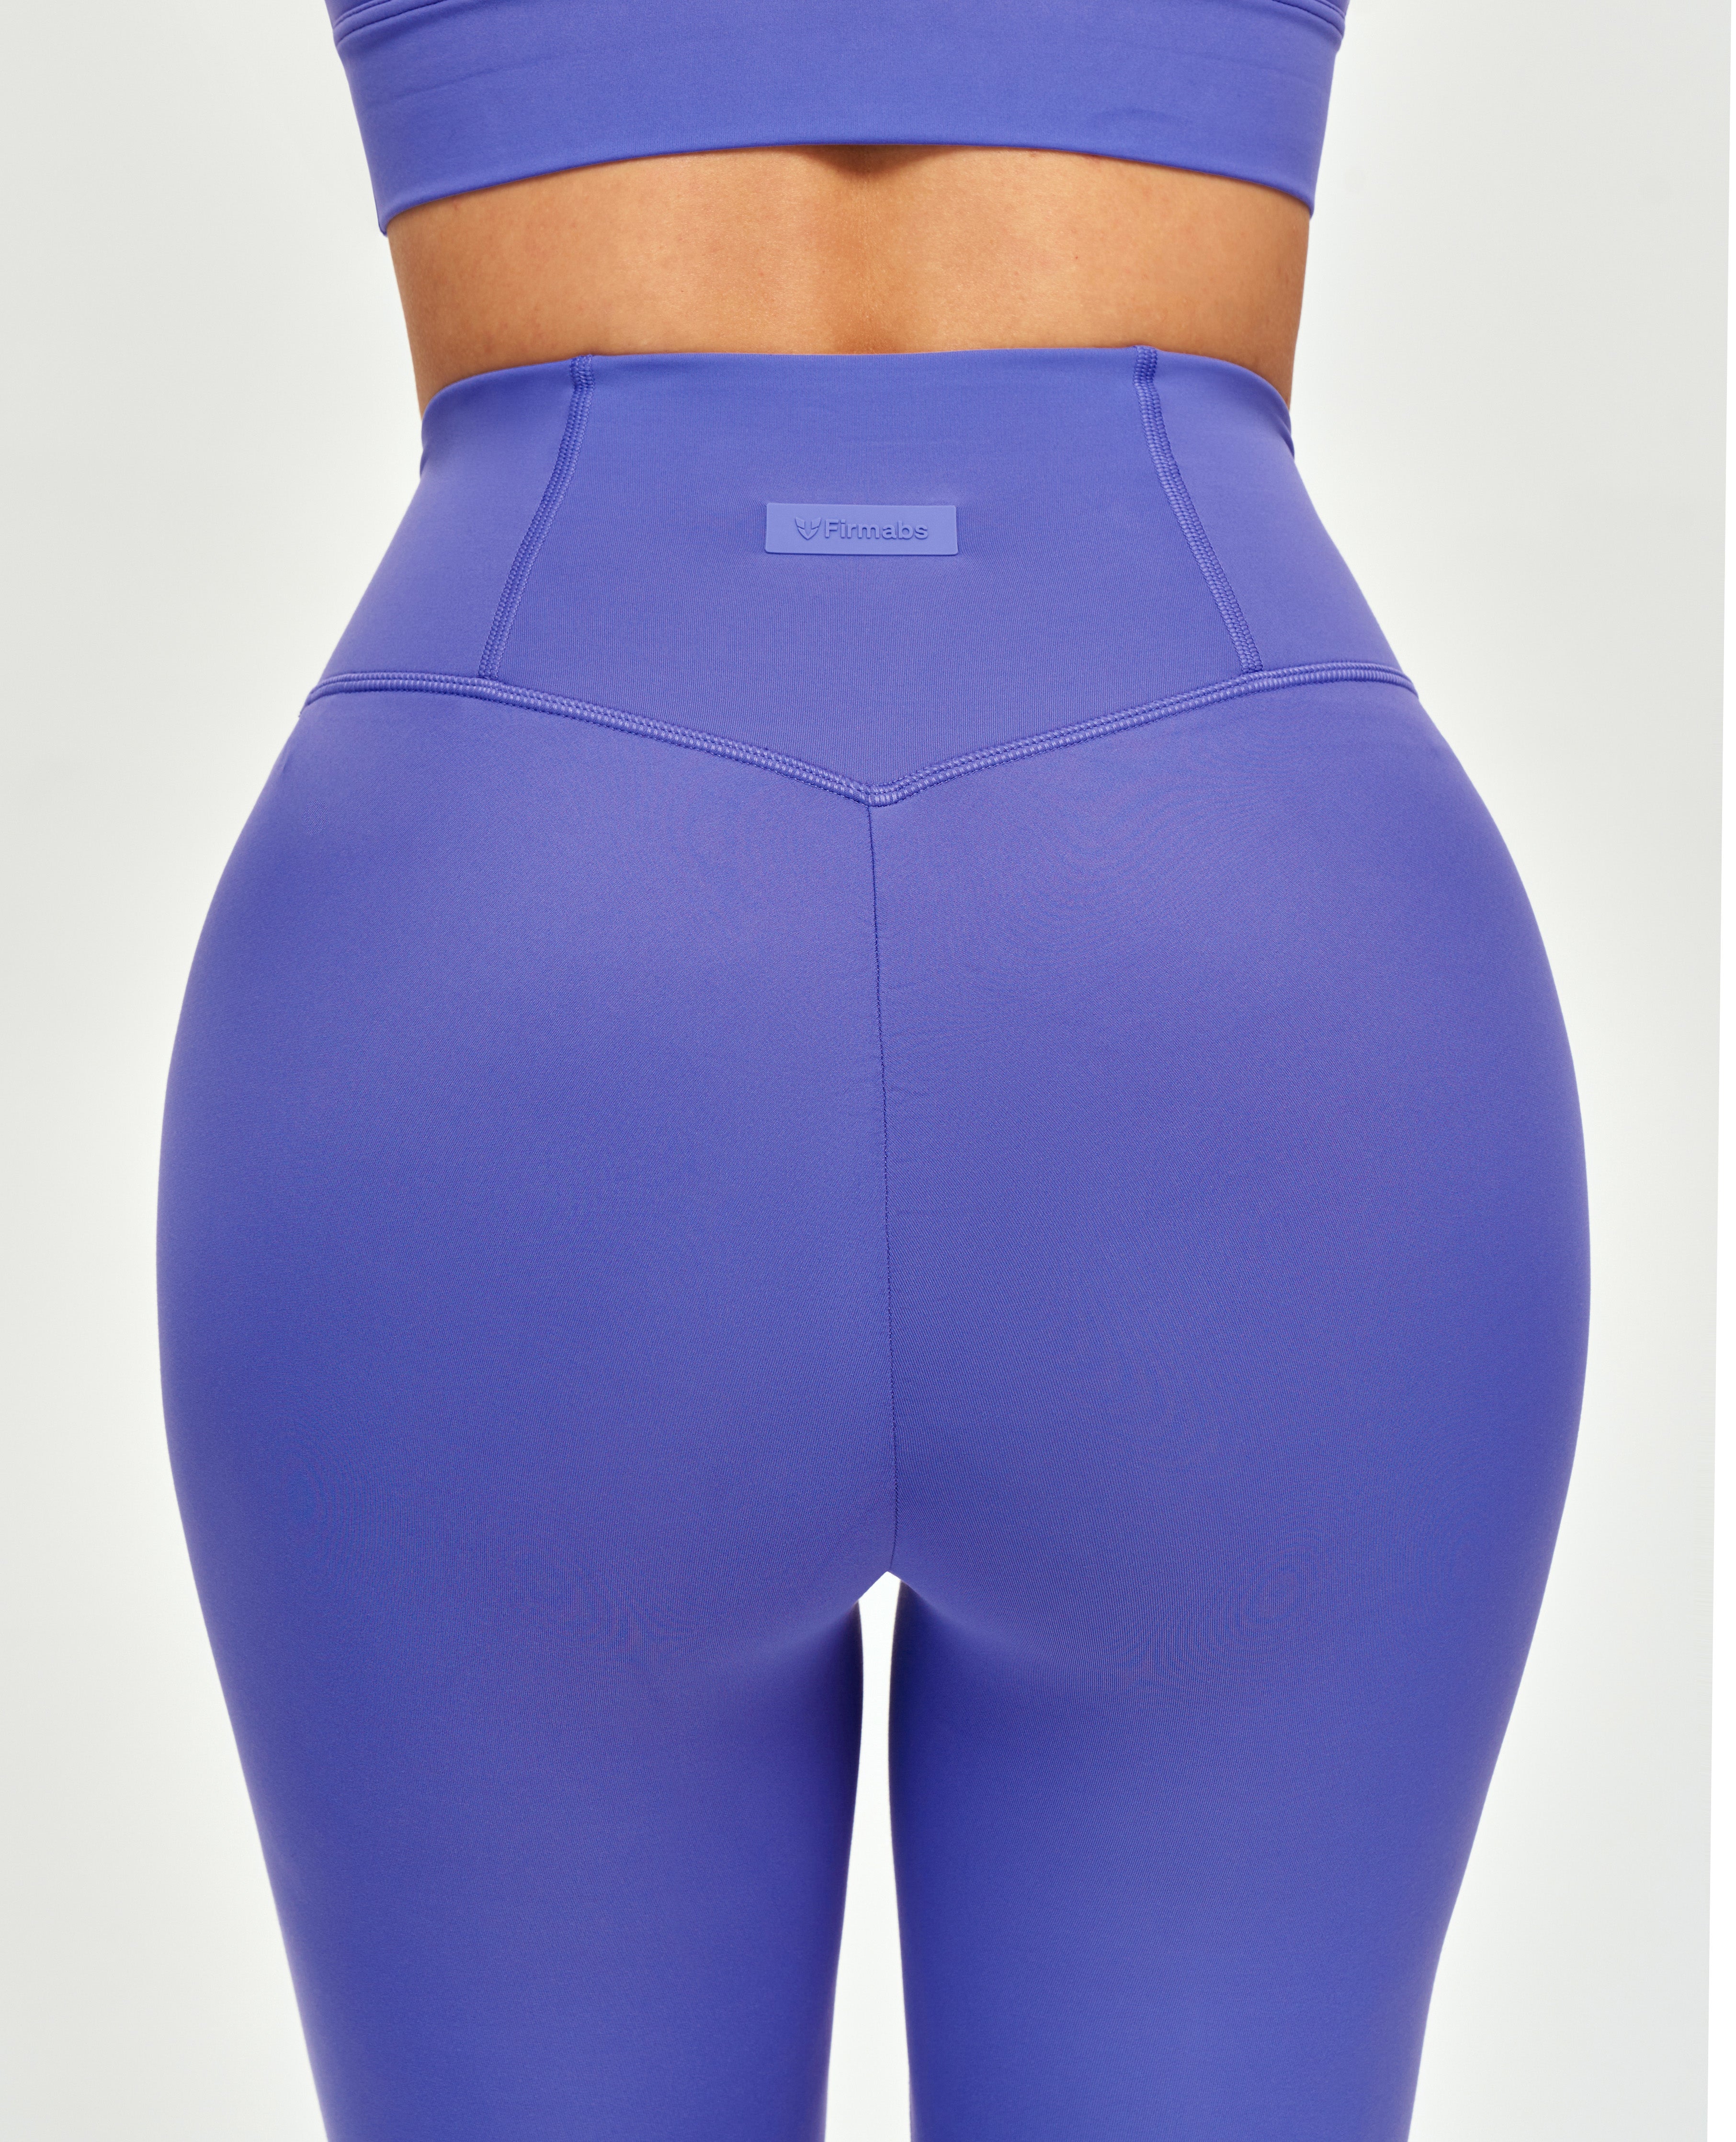 Seamless Scrunch Bum Yoga Leggings for Women - Soft Contouring Stretch  Fitness Tights, Curve-Enhancing Workout Pants